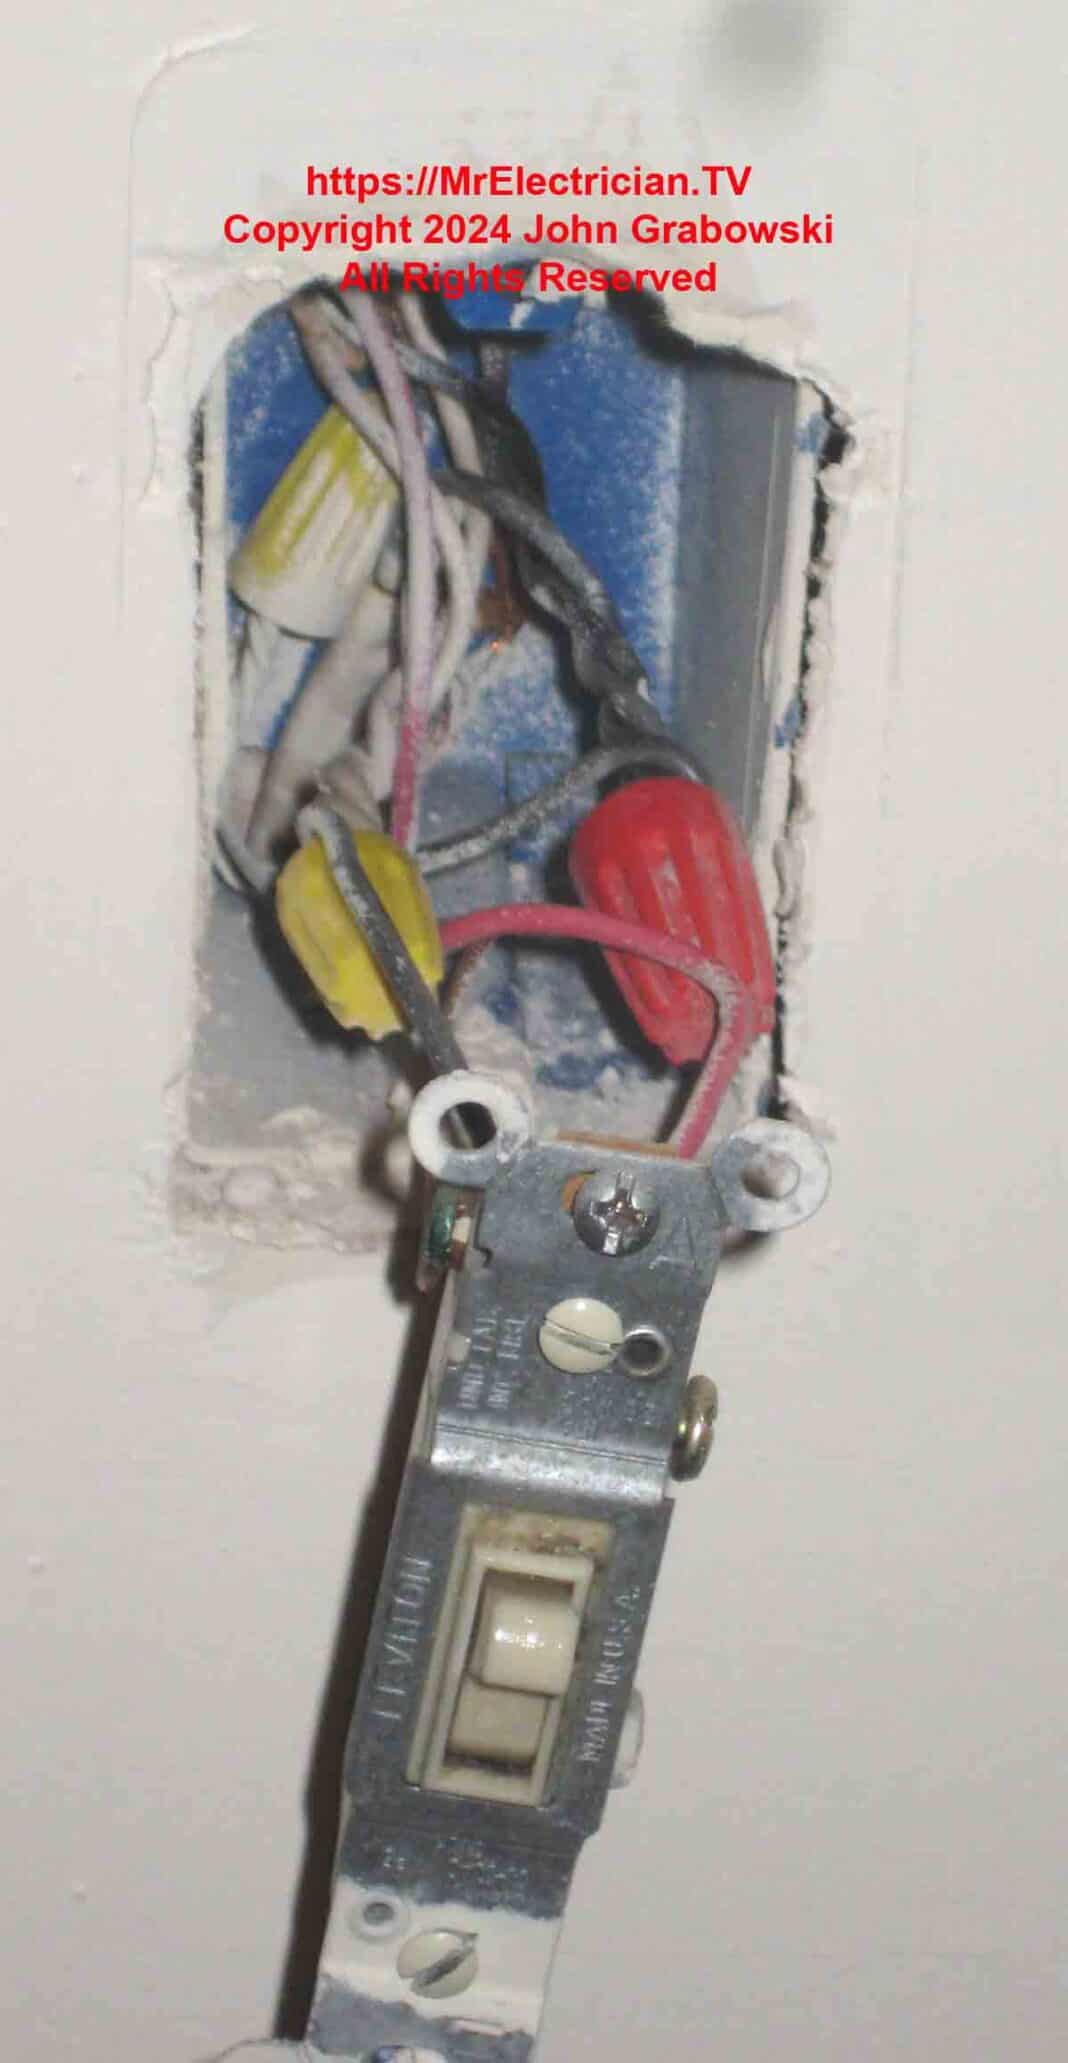 An existing wall switch with the correct wires needed for adding a new outlet.